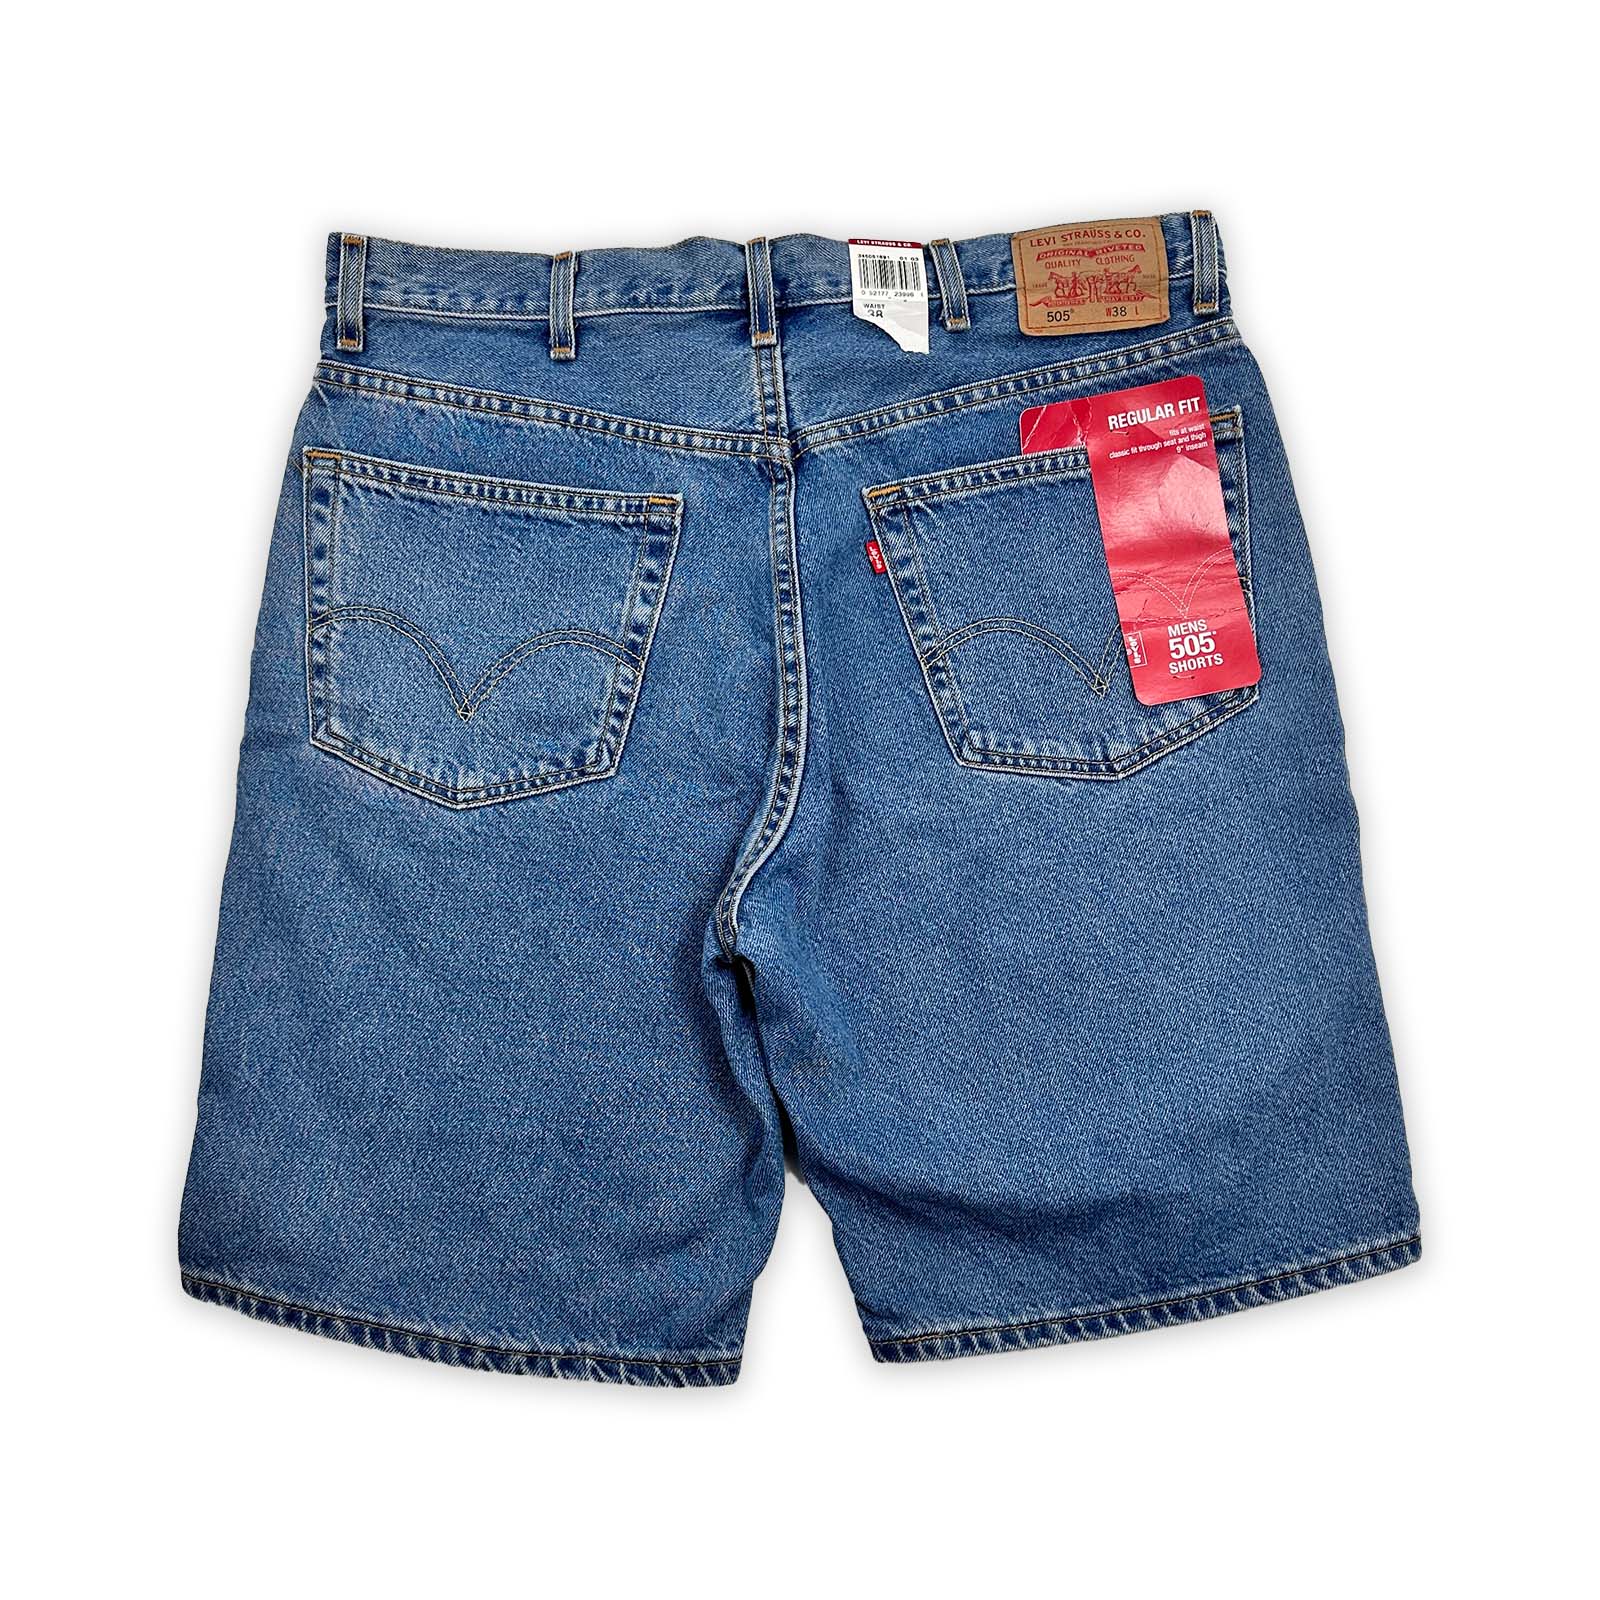 Vintage Levi's 505 Shorts - Men's 38 - New with Tags Great Lakes Reclaimed Denim